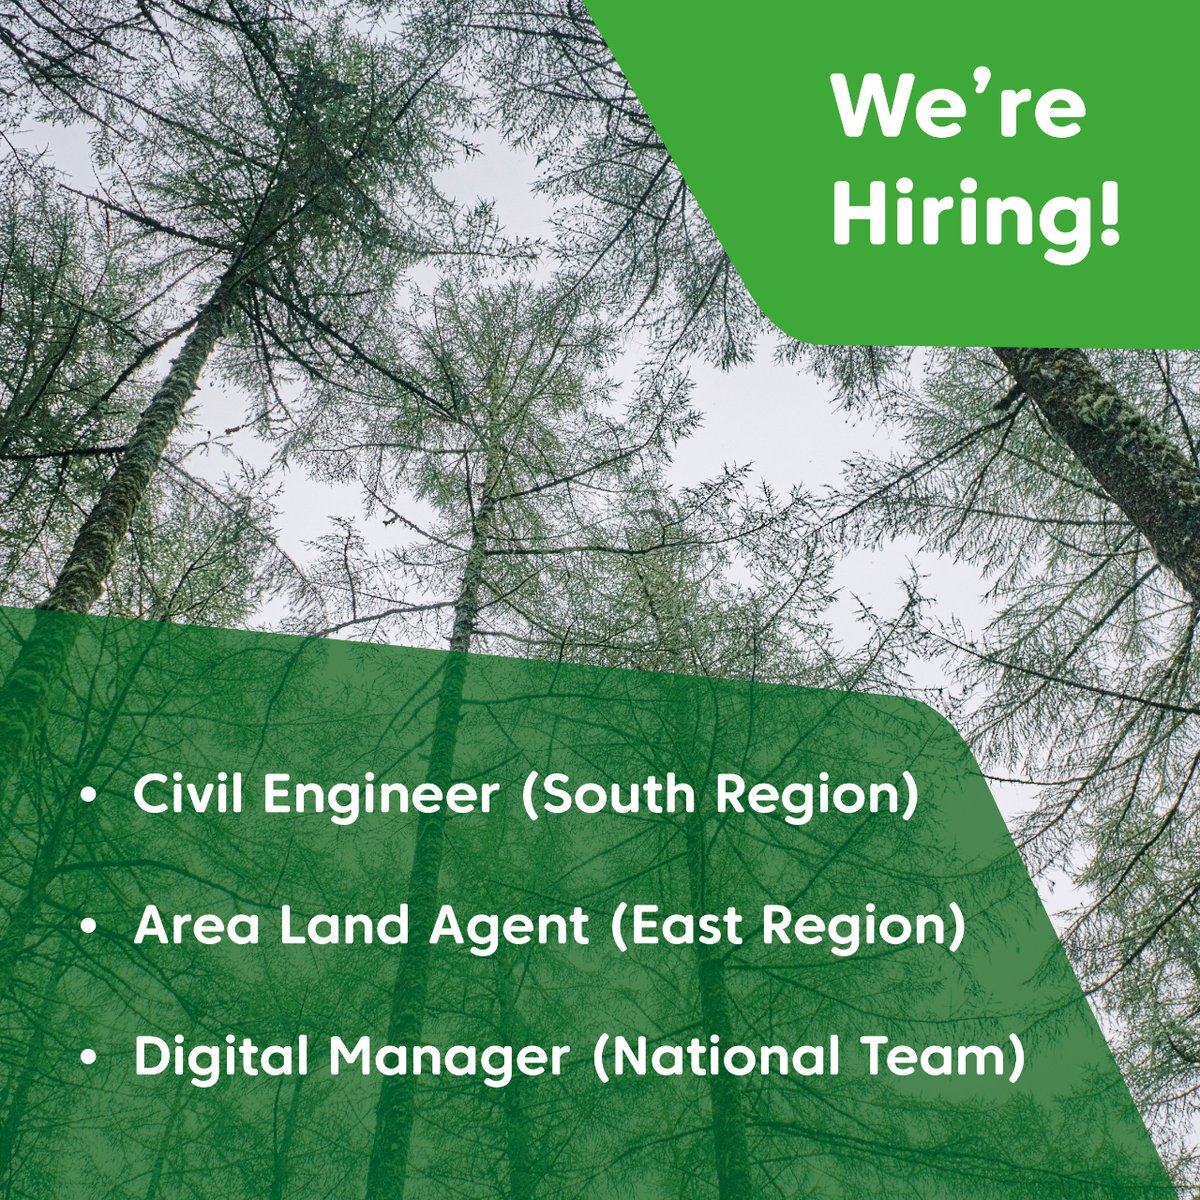 📣 We're currently hiring a range of positions across the country.  ➡️ Civil Engineer (South Region) ➡️ Area Land Agent (East Region) ➡️ Digital Manager (National Team) Join us in helping look after Scotland’s national forests and land. forestryandland.gov.scot/jobs/current-o…